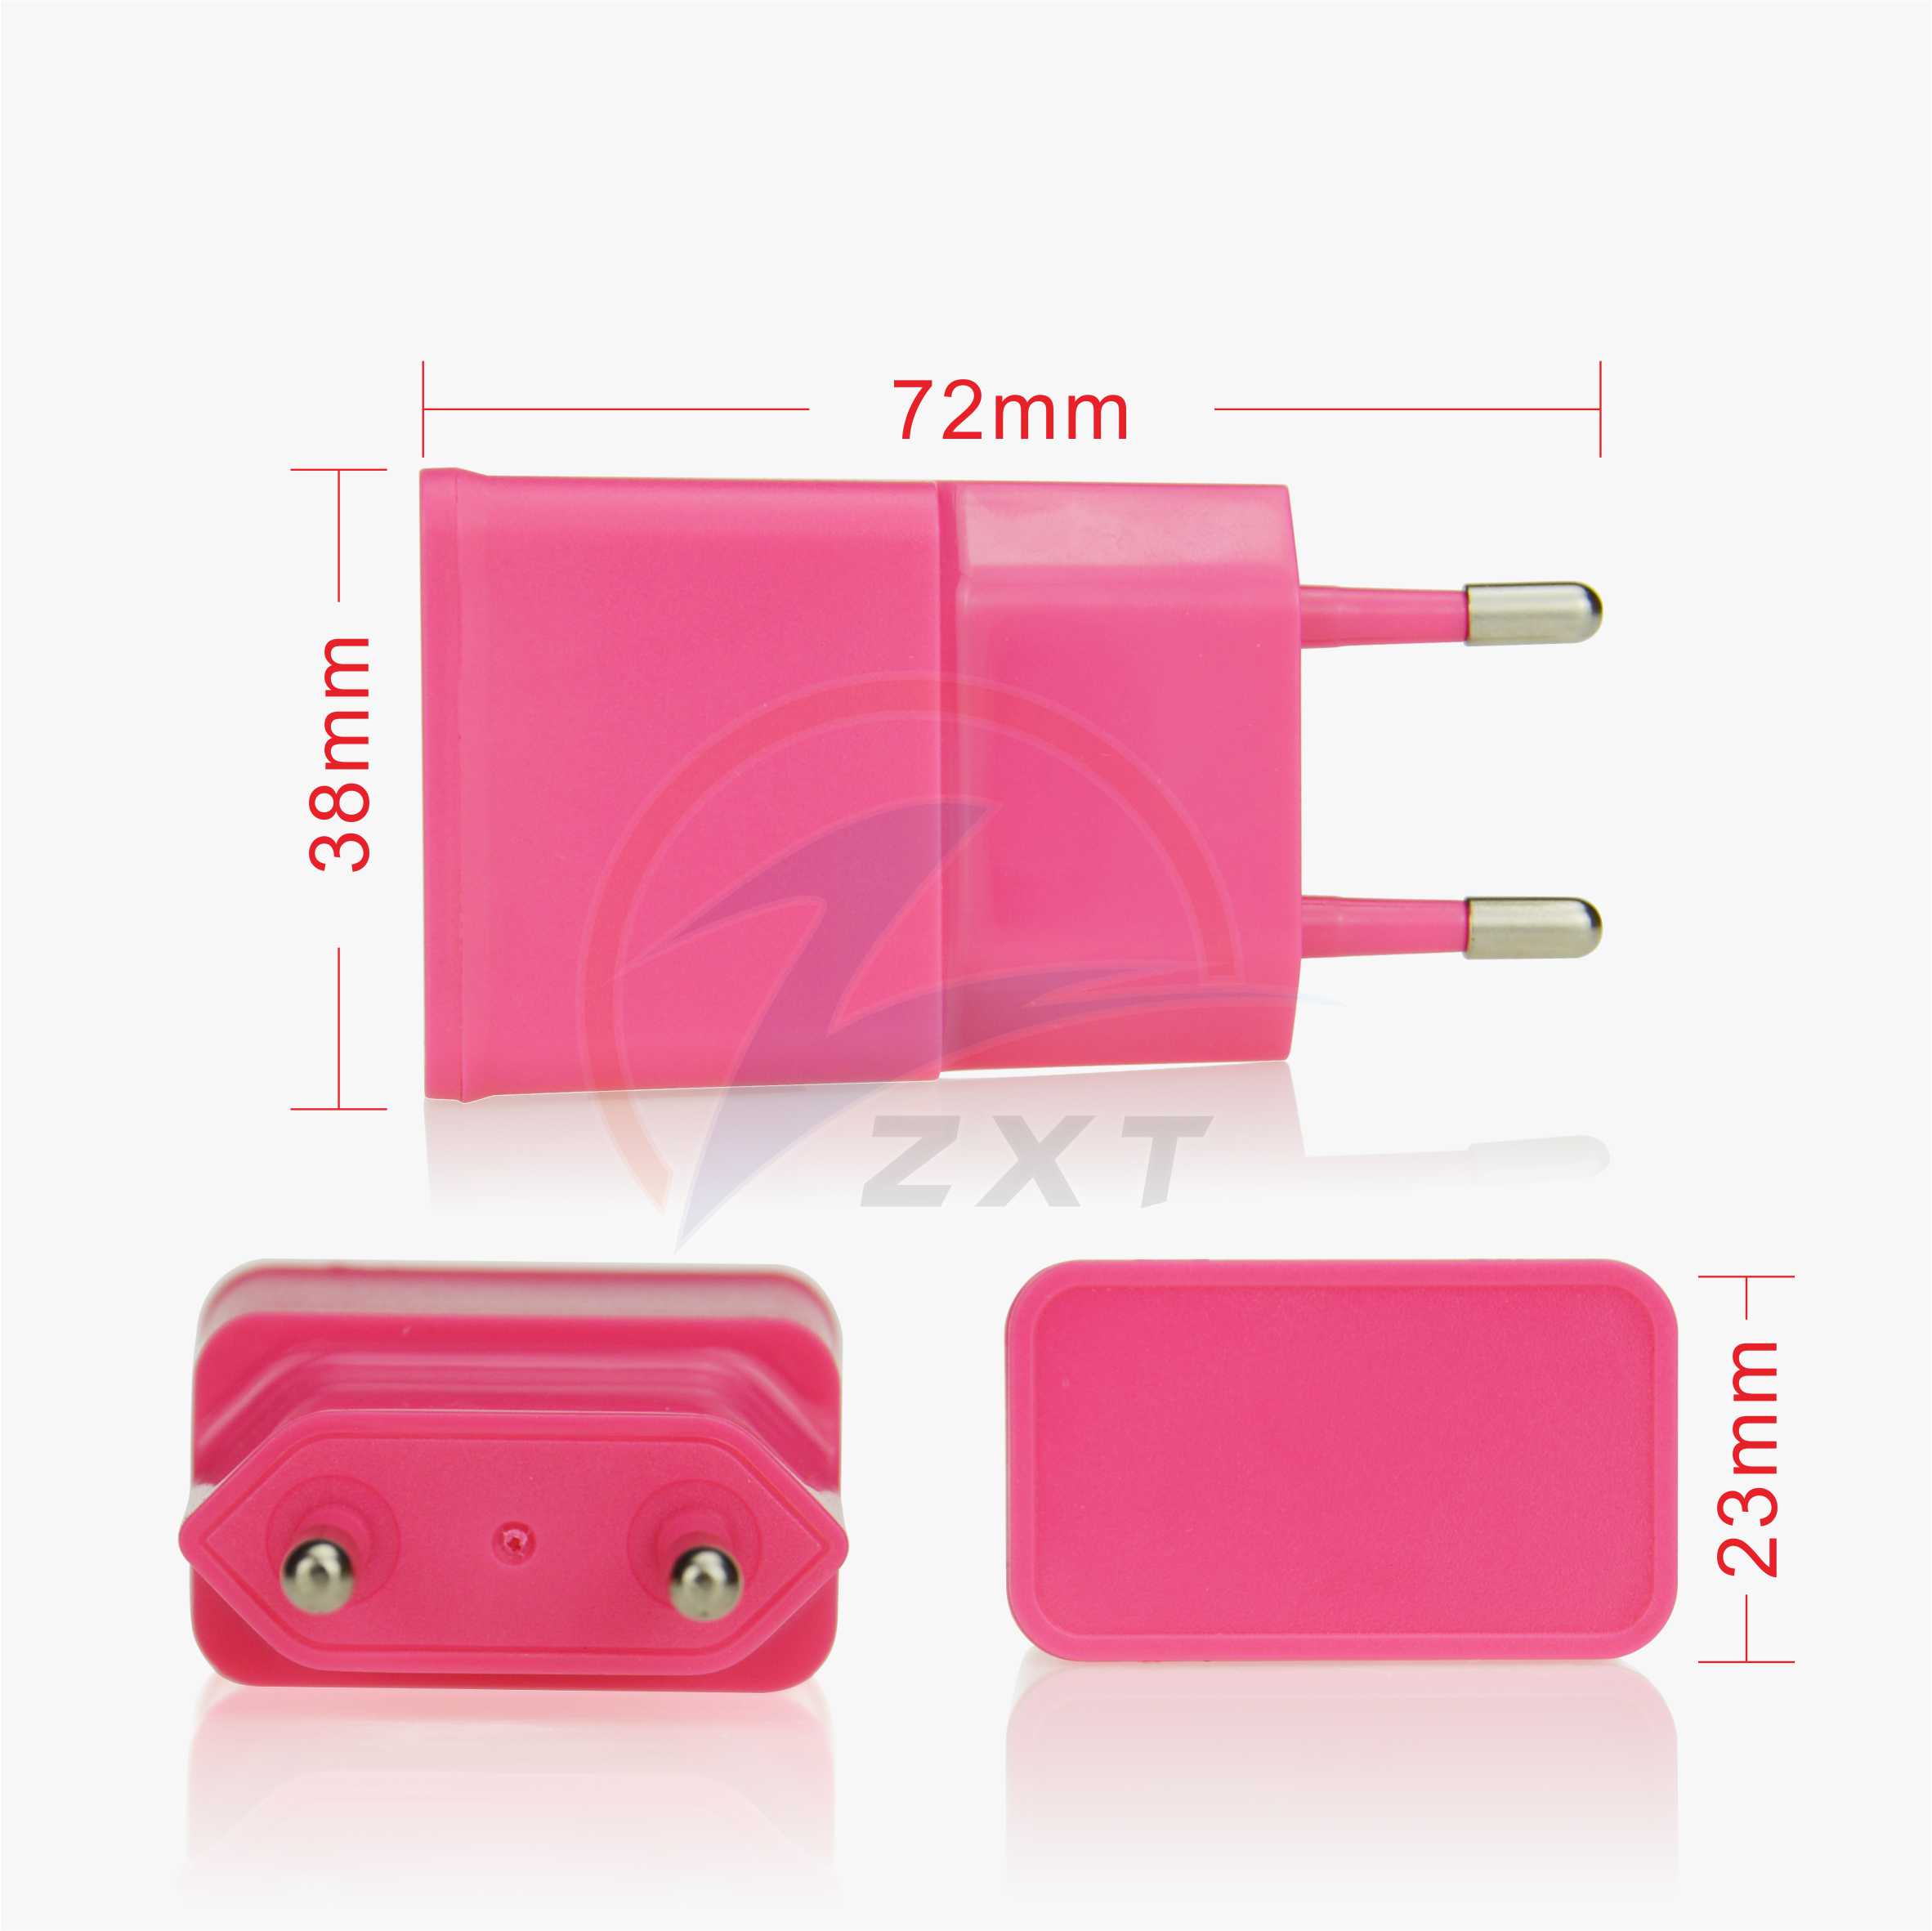 Micro USB Travel Charger